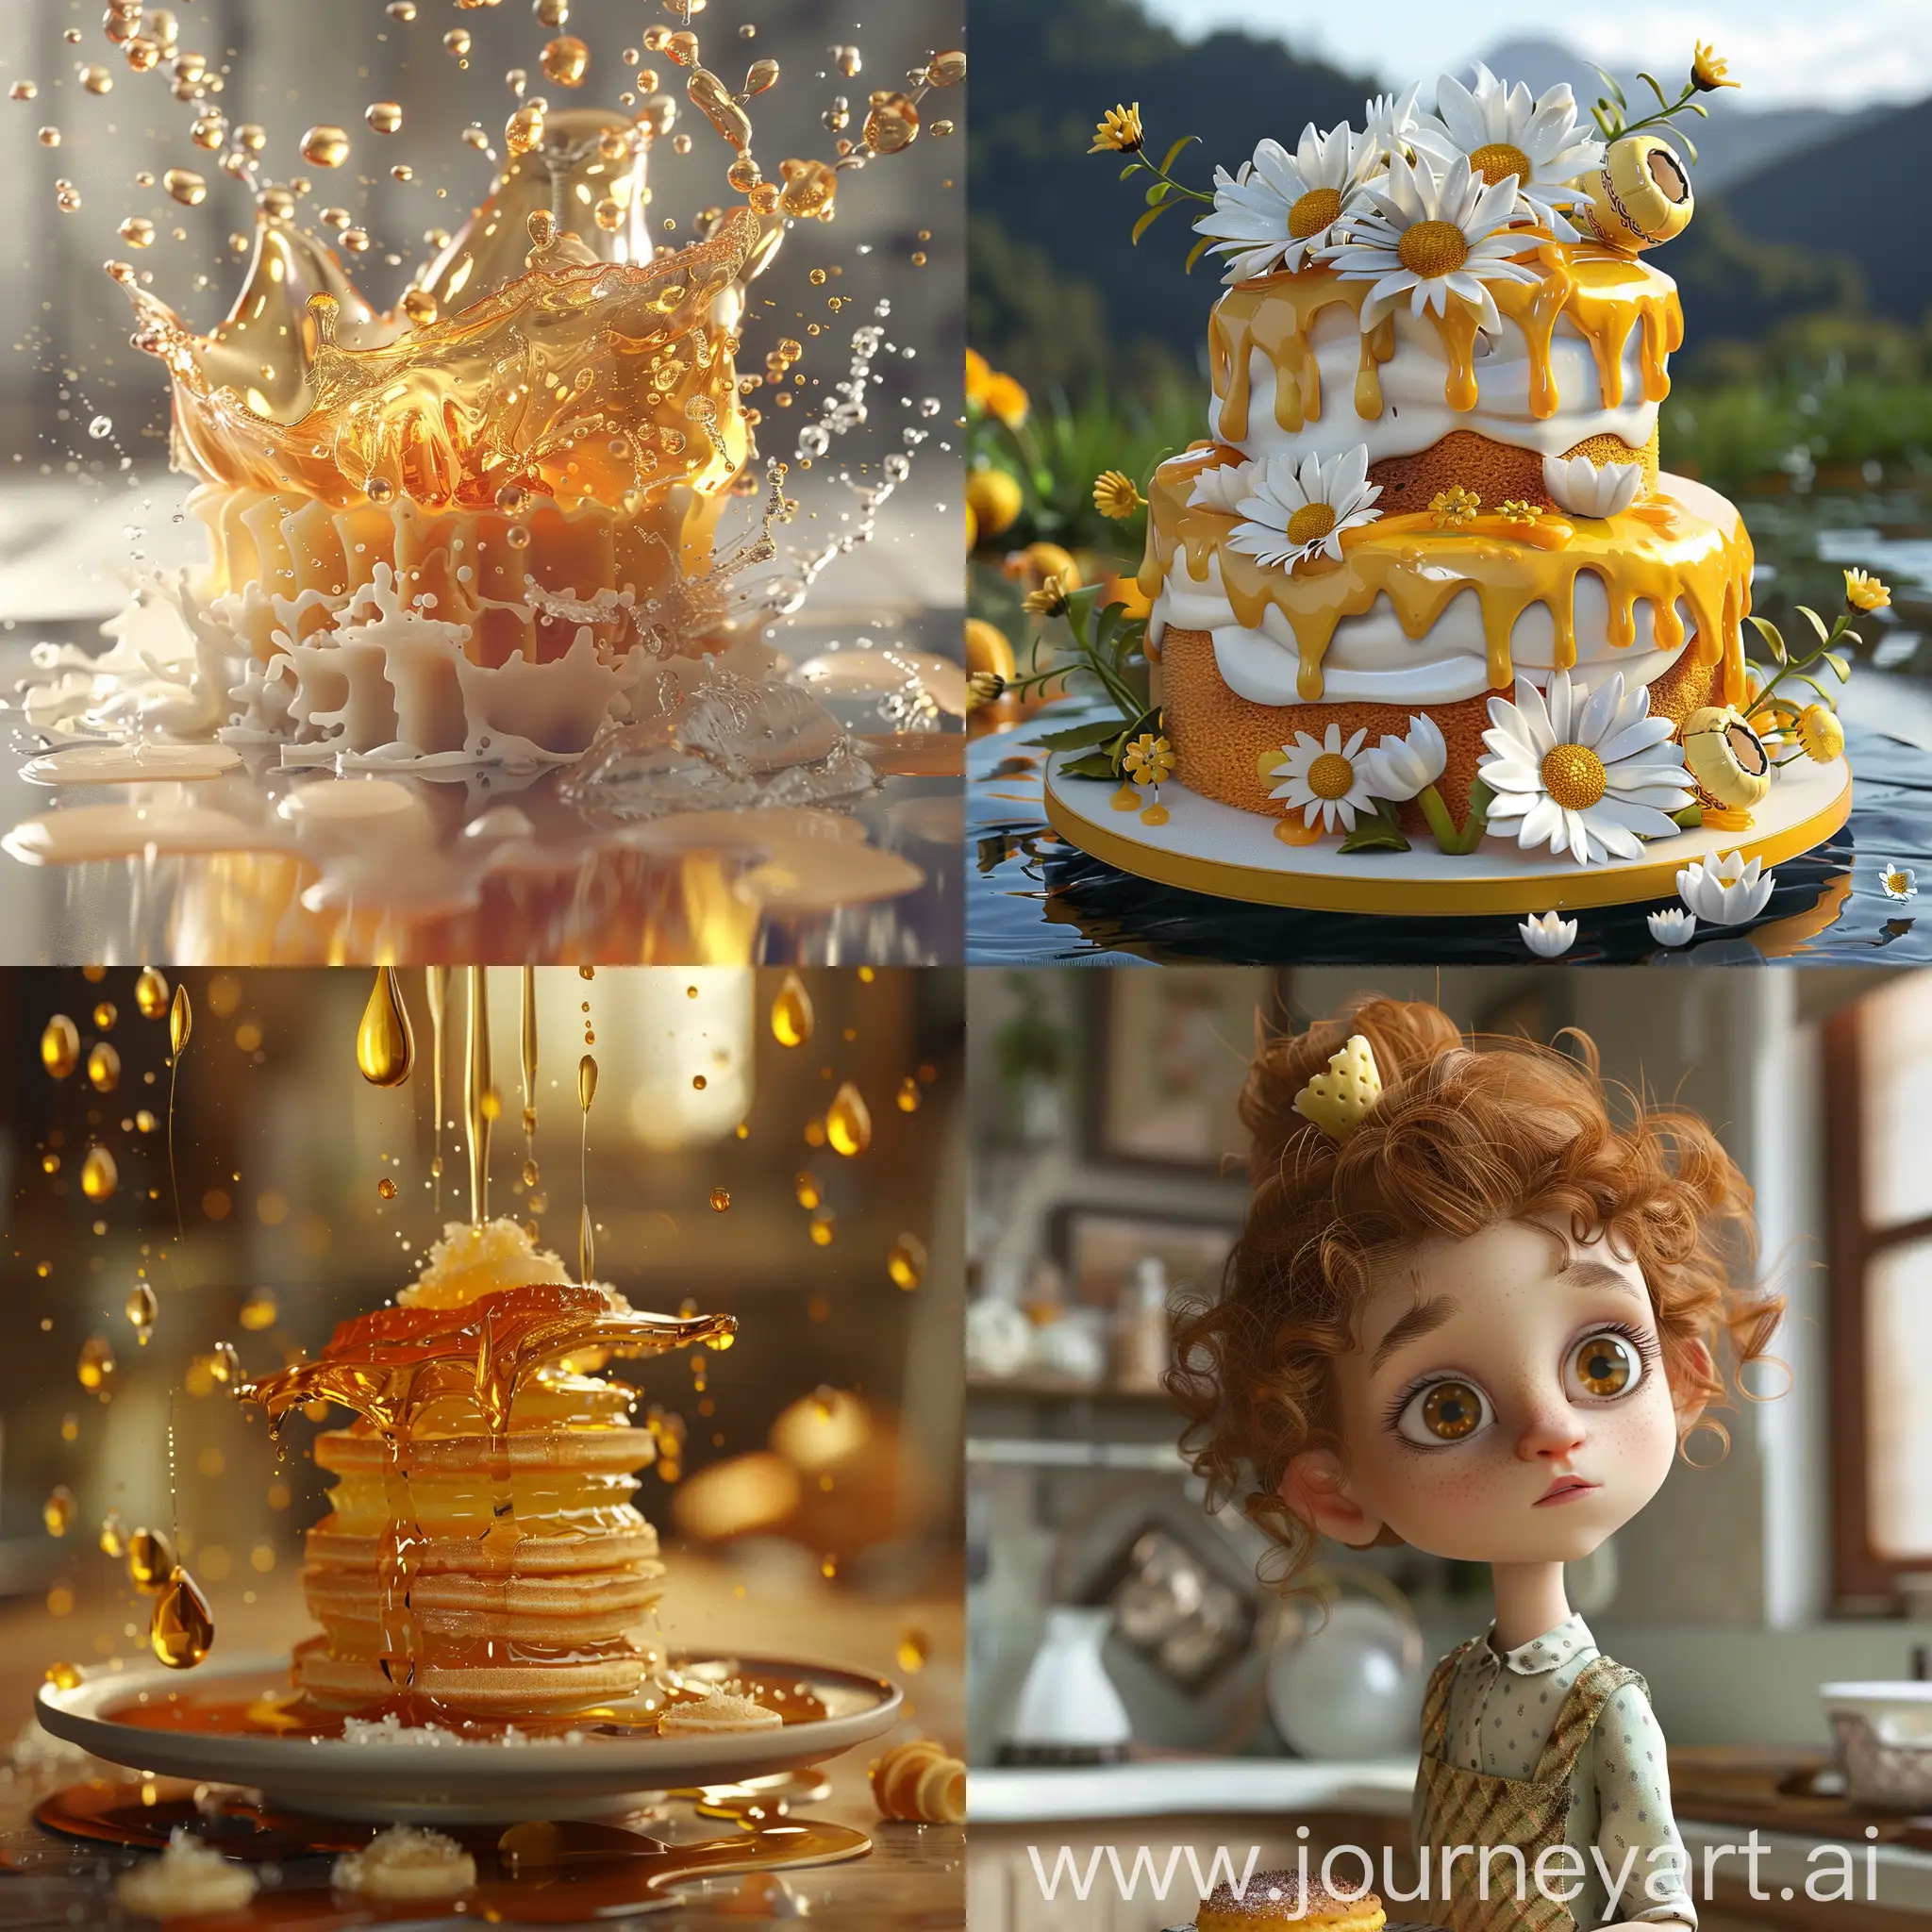 Delicious-Cake-Drizzled-with-Honey-Vibrant-3D-Animation